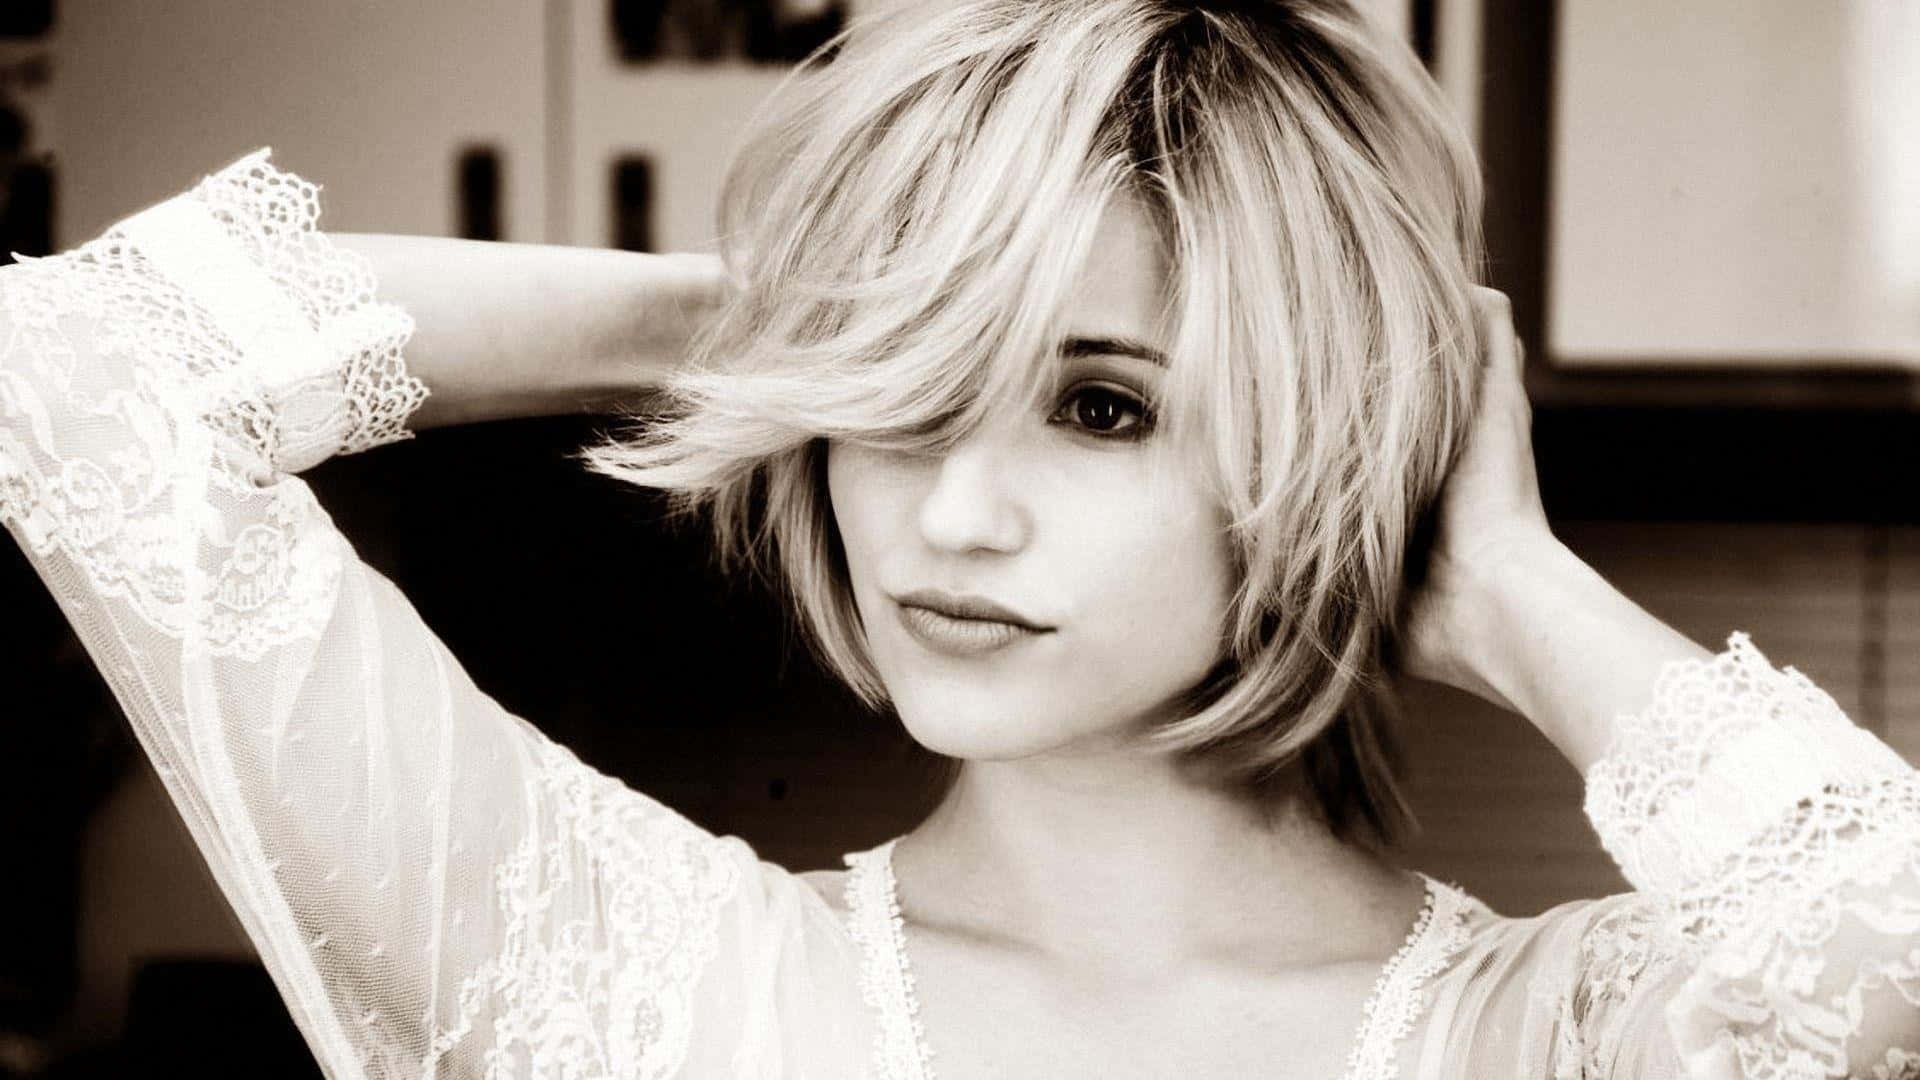 Dianna Agron captivating smile in a close-up portrait. Wallpaper